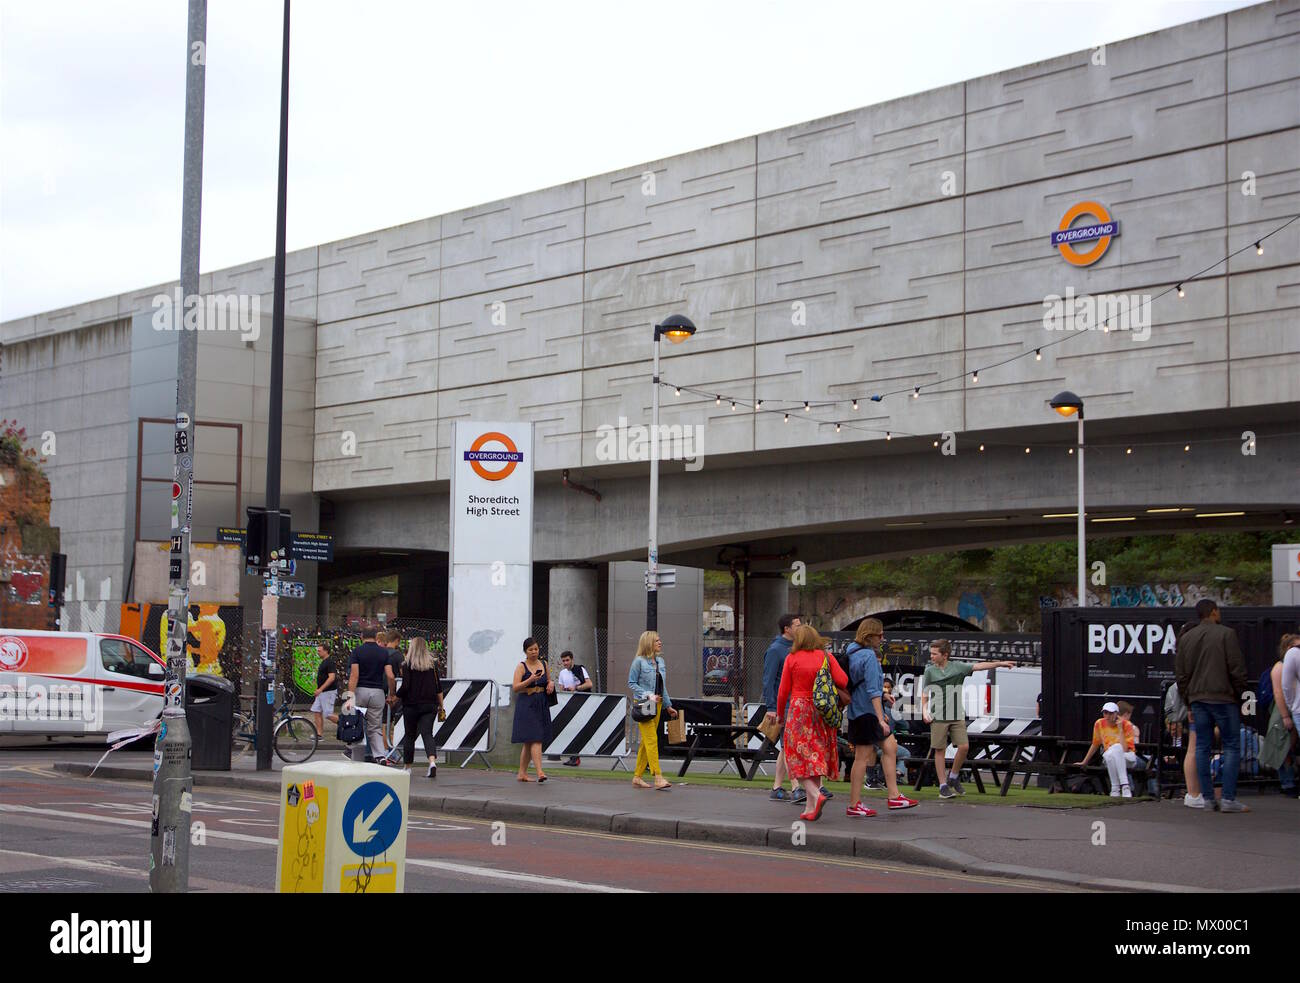 Shoreditch High street showing Boxpark Shoredtich and the sign for the overground station Stock Photo